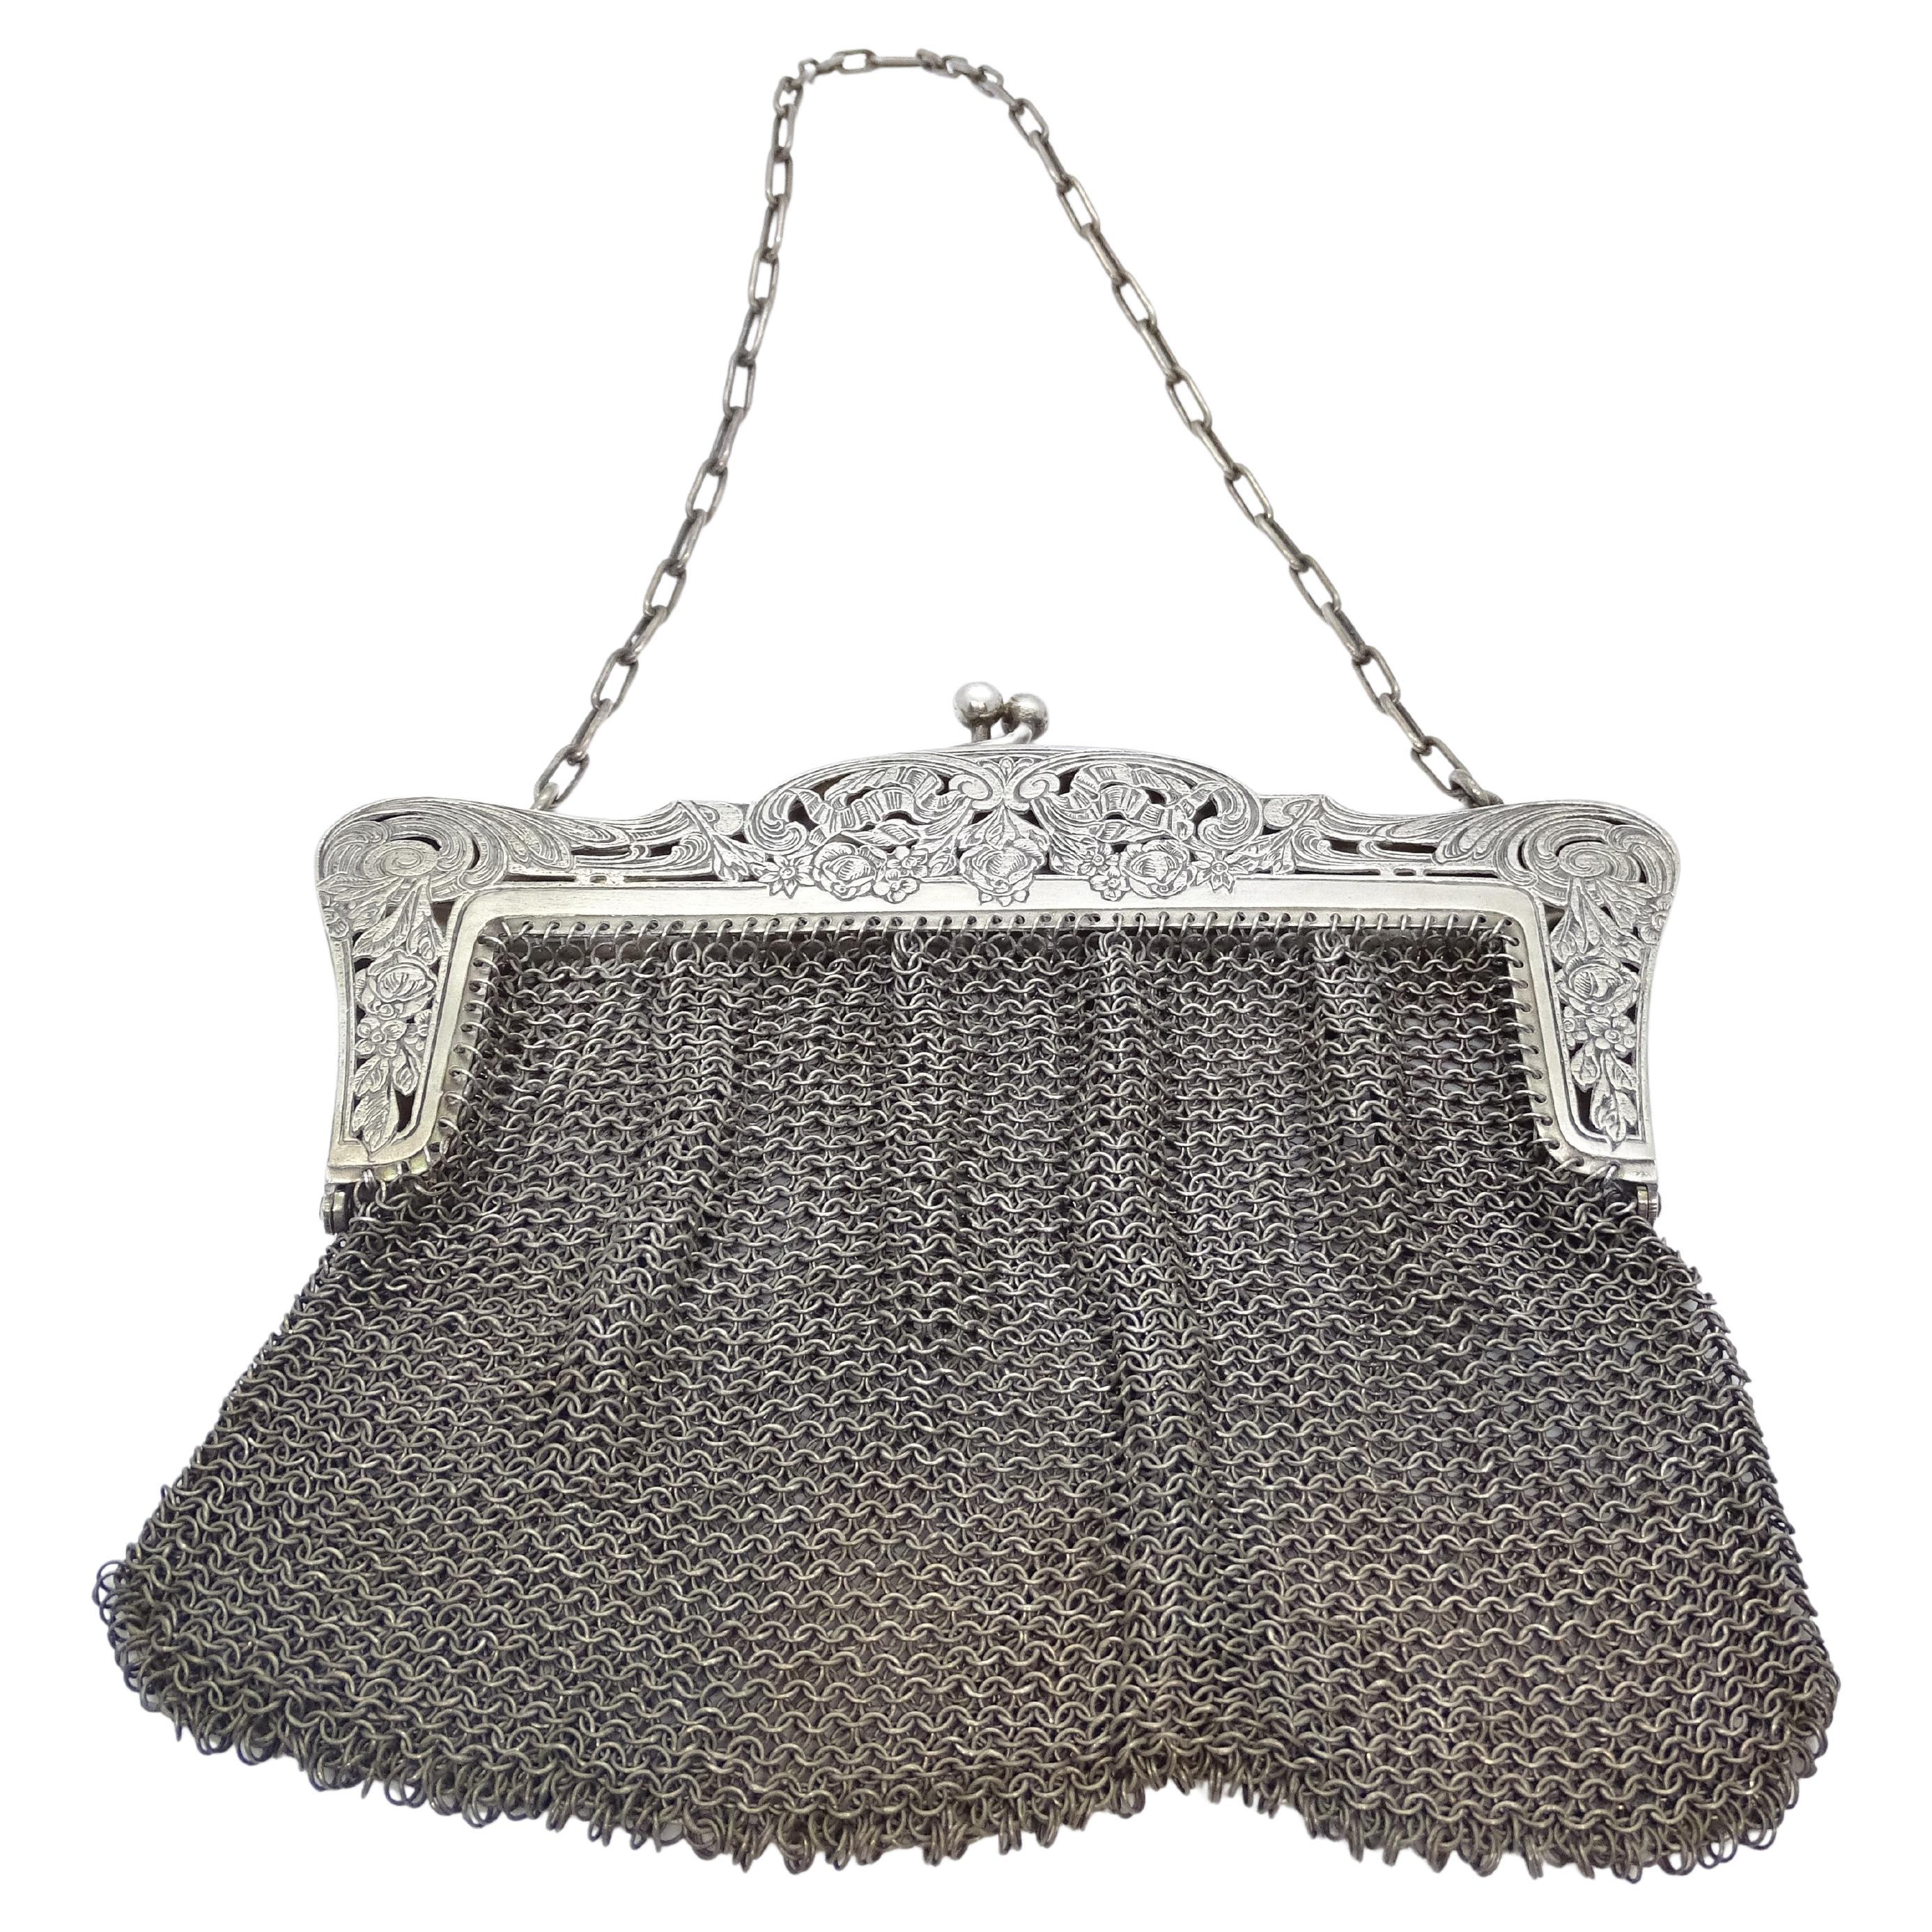 Antique pouch bag, silver plate, late 19th century – England For Sale